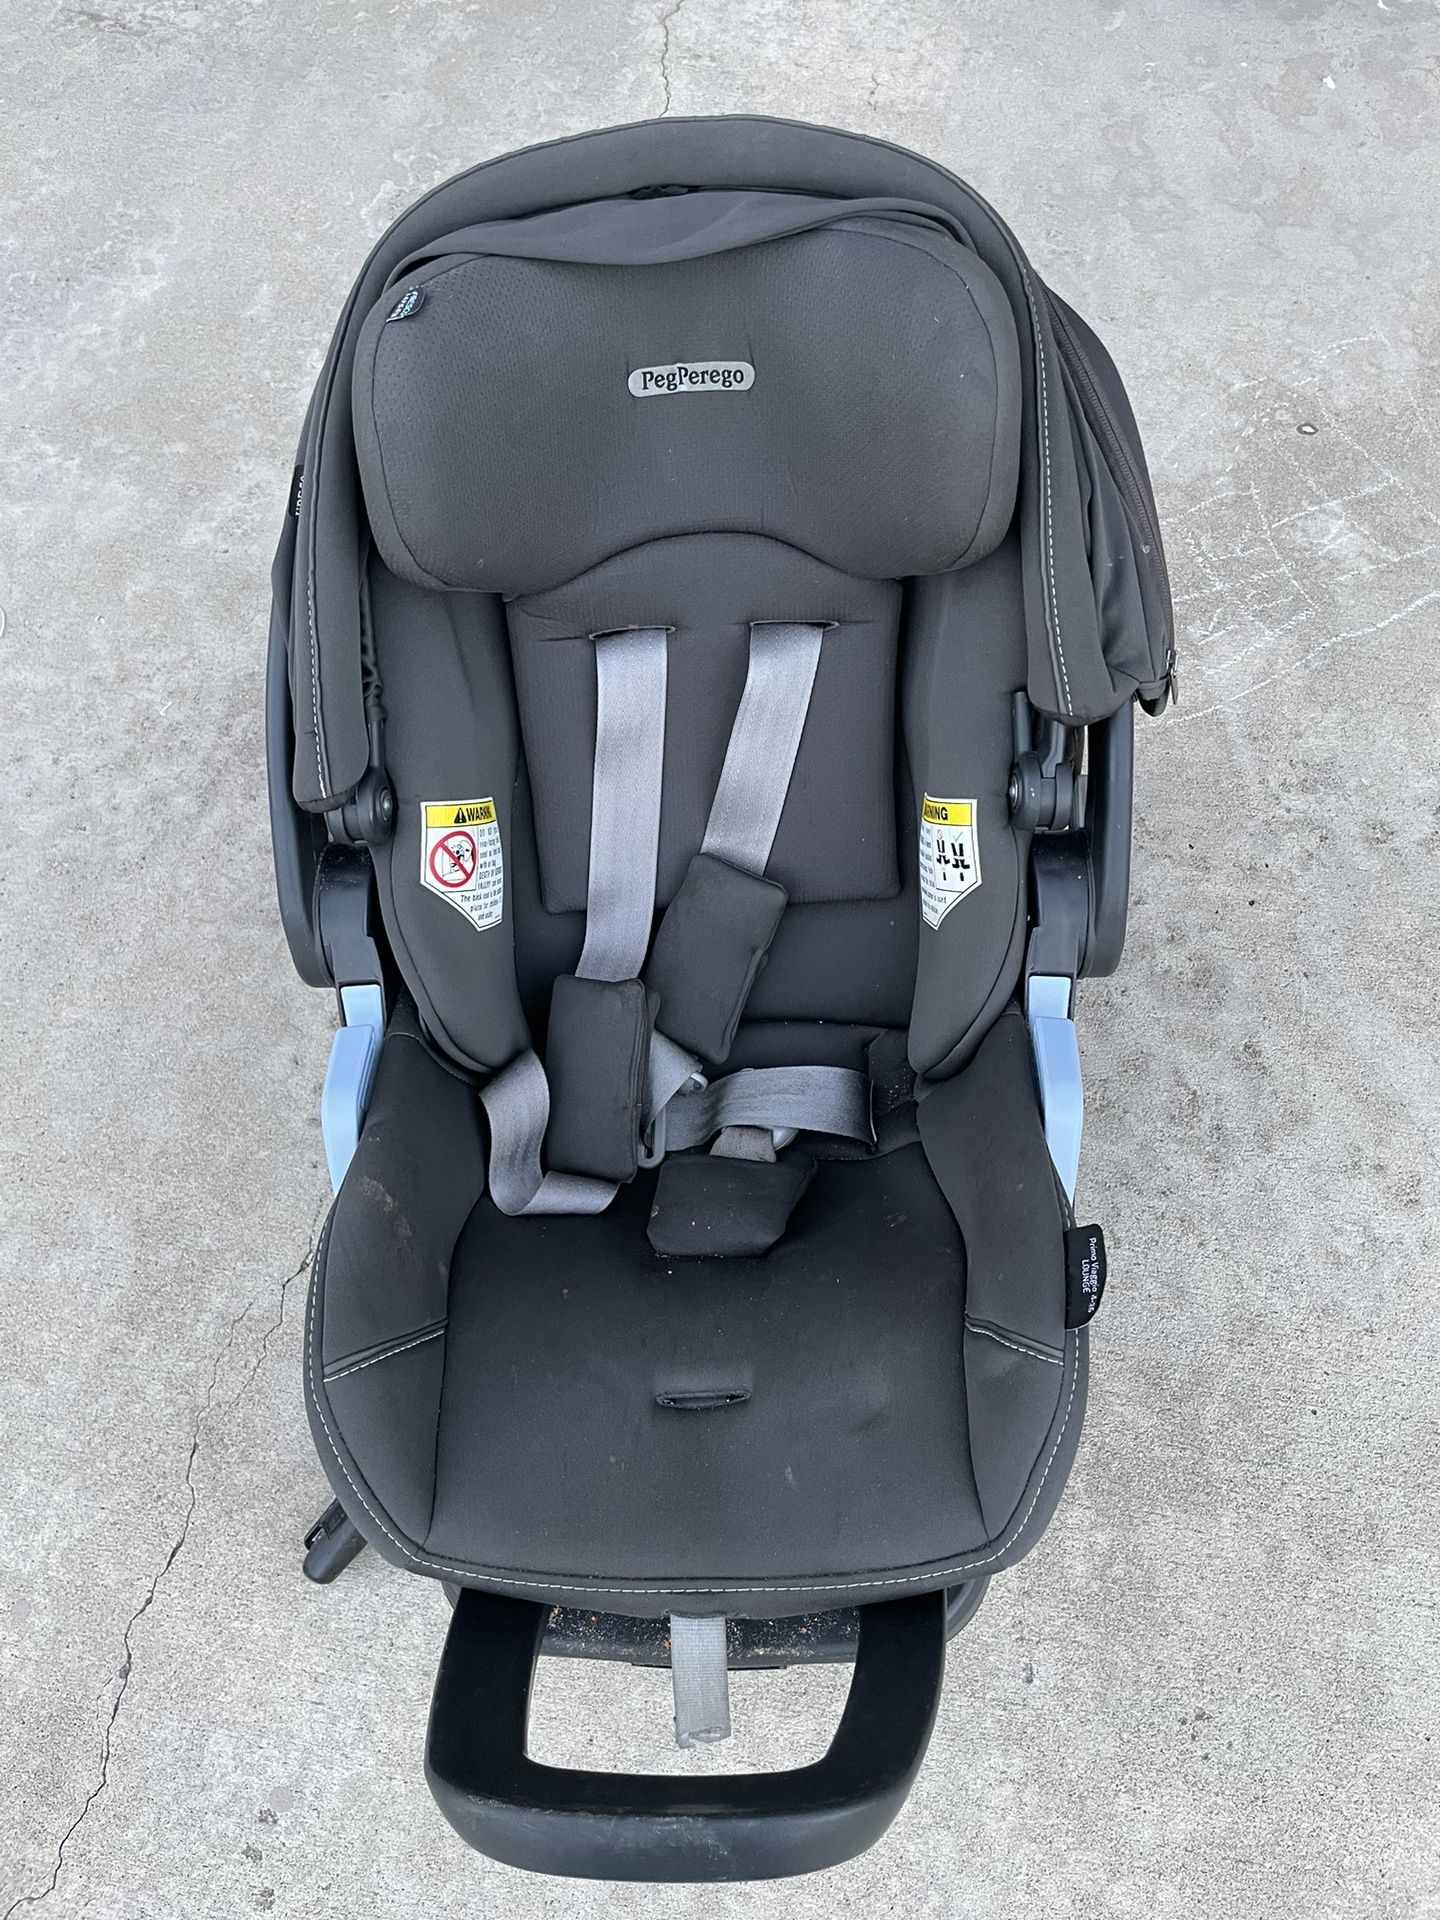 VeryGood condition infant, rear-facing car seat (Peg Perego Primo Viaggio 4-35 Lounge, Made in Italy)